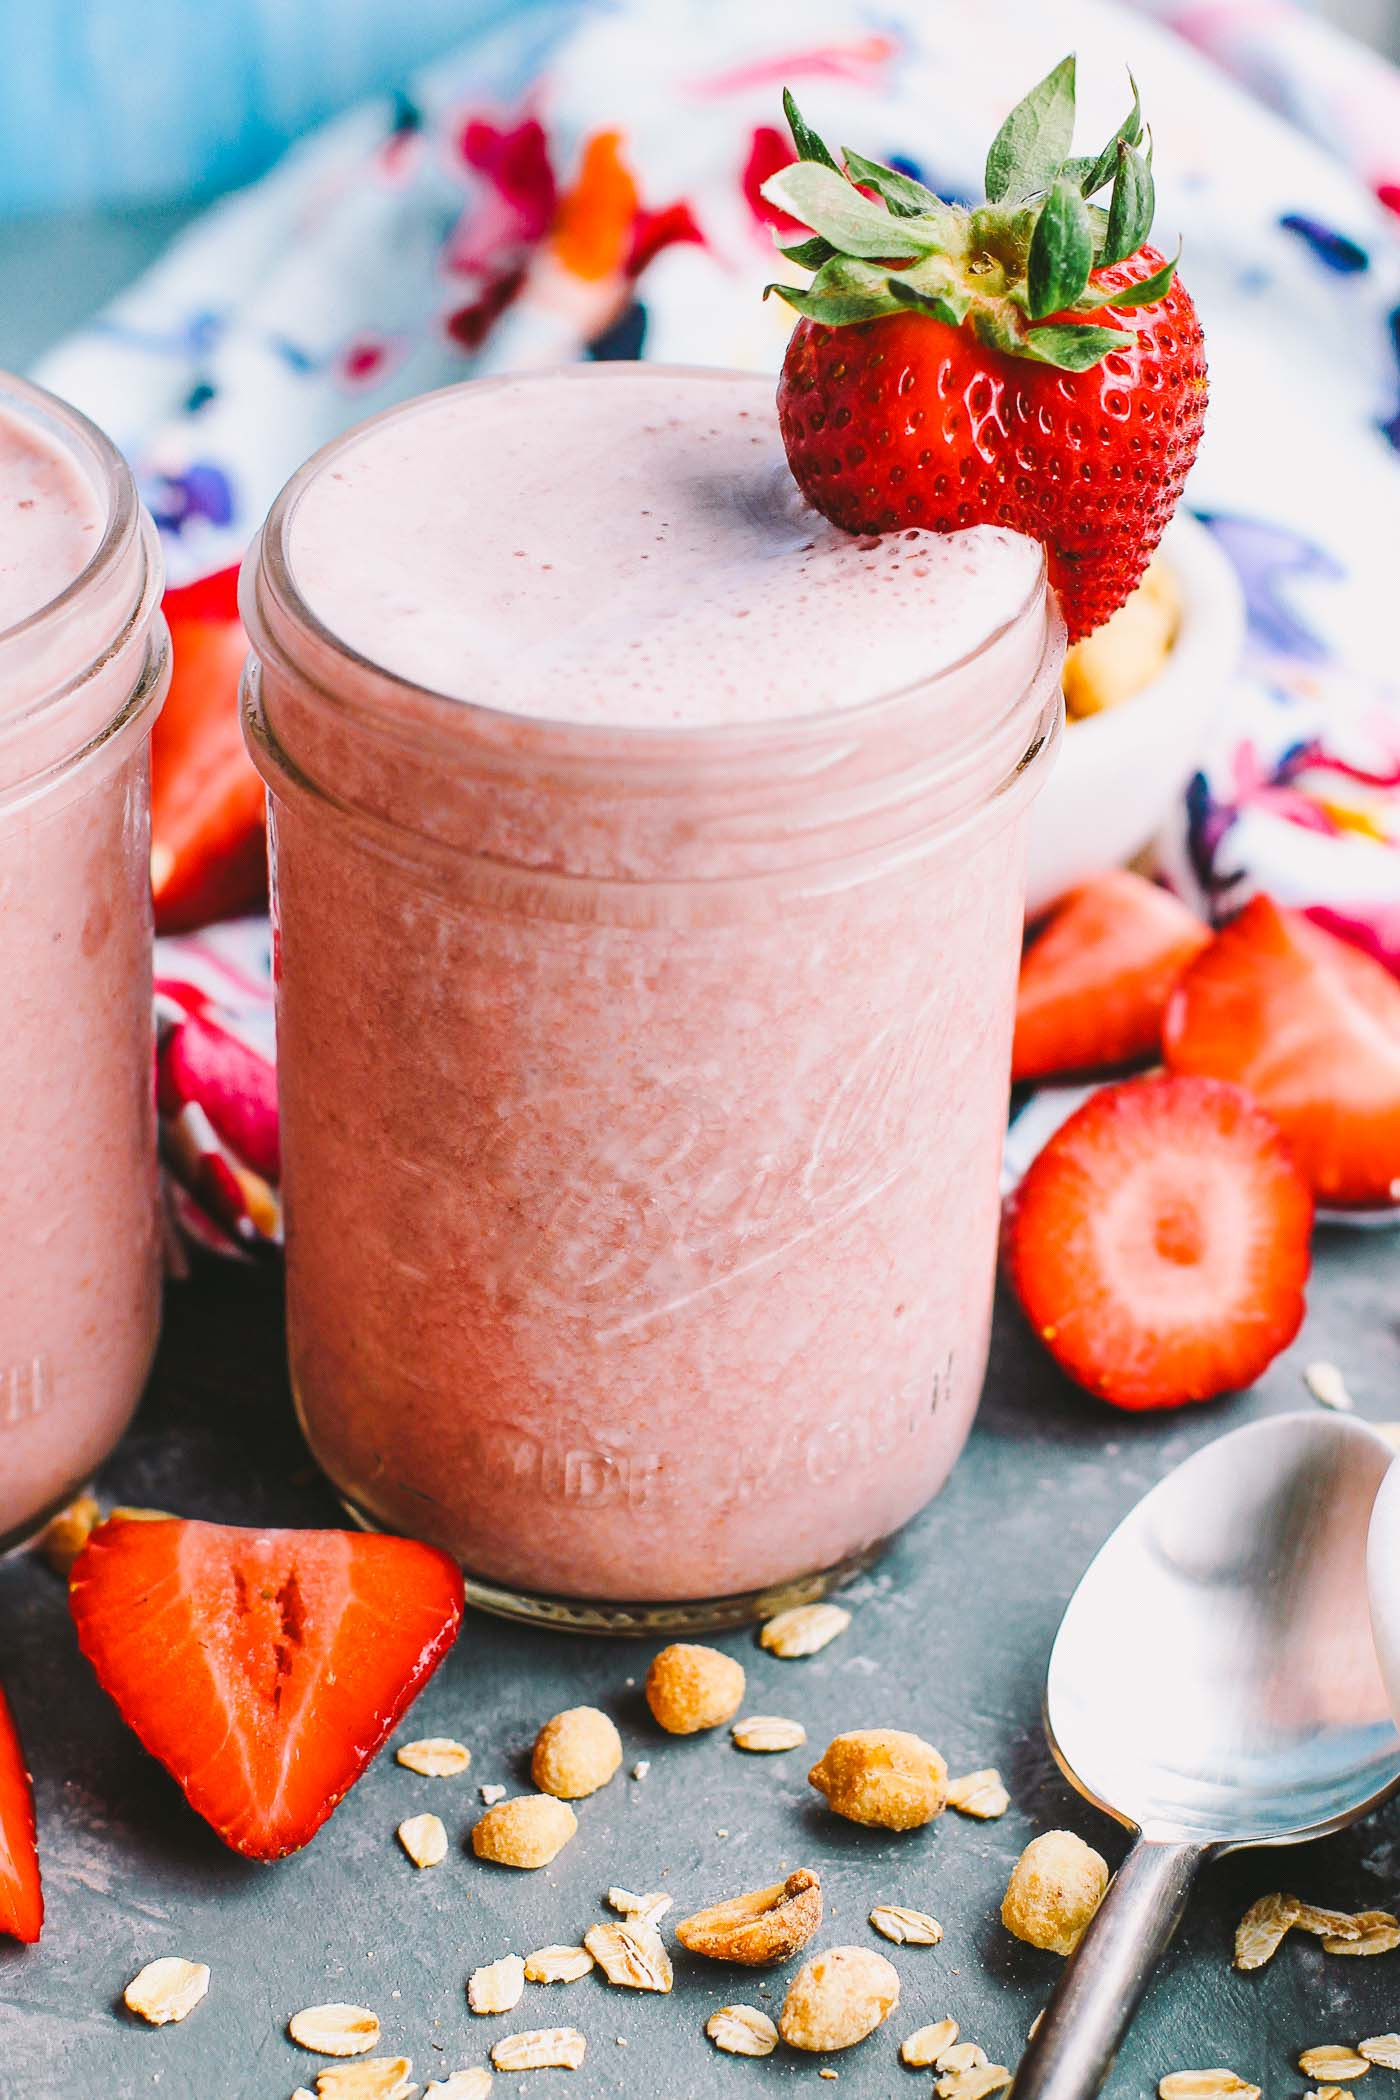 Healthy Protein Breakfast Smoothies
 strawberry pb&j protein smoothies plays well with butter